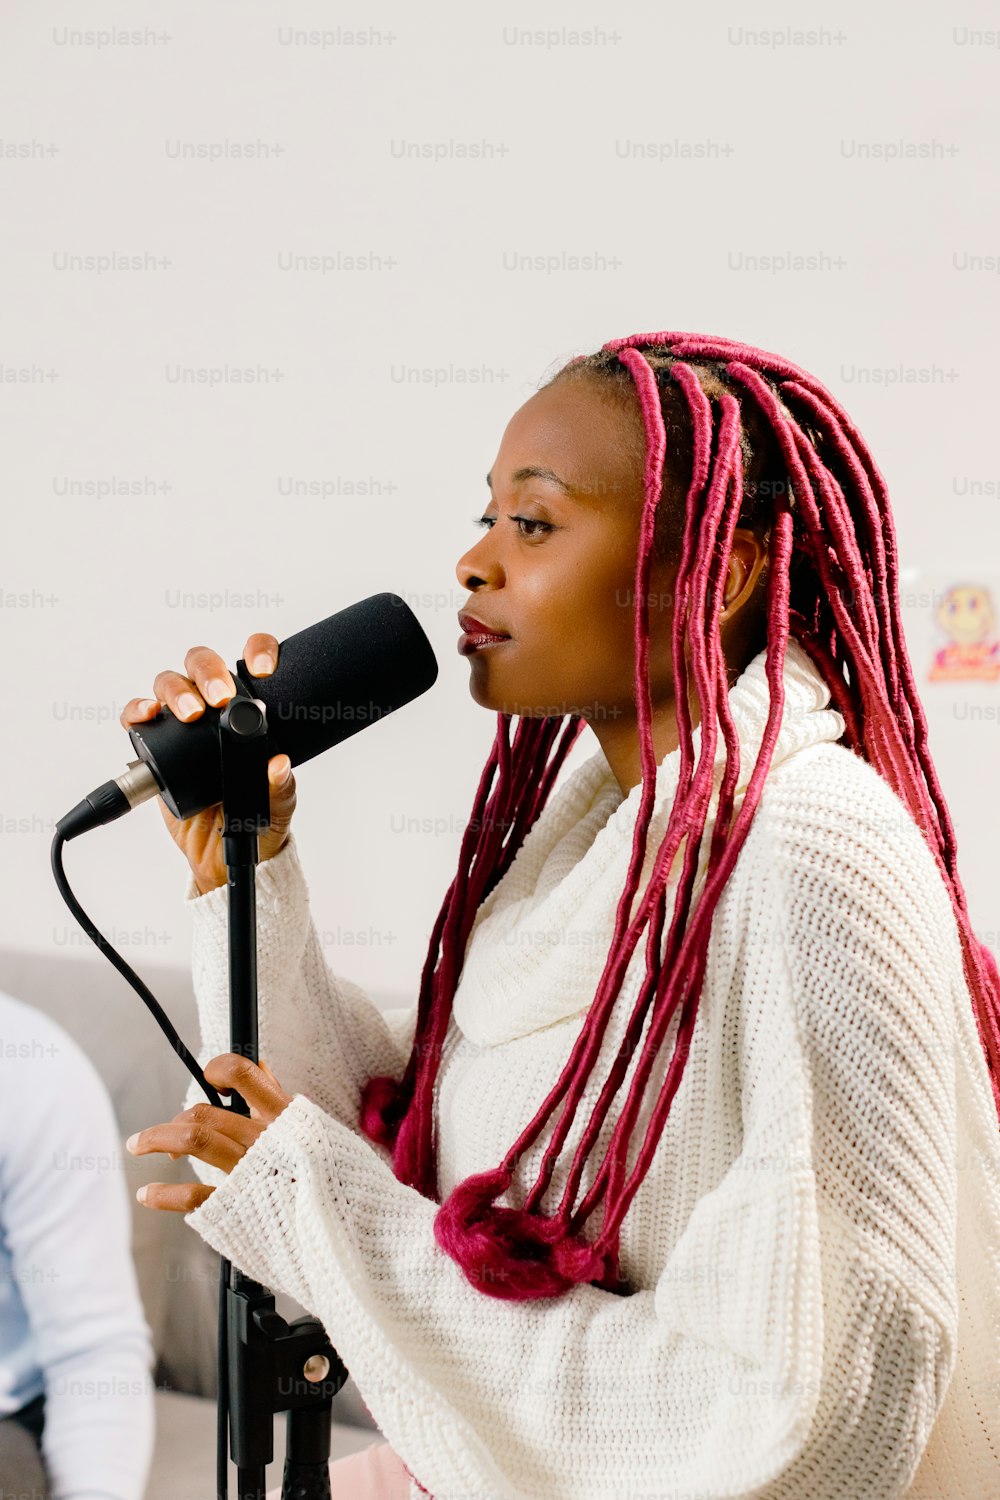 a woman with red dreadlocks is singing into a microphone